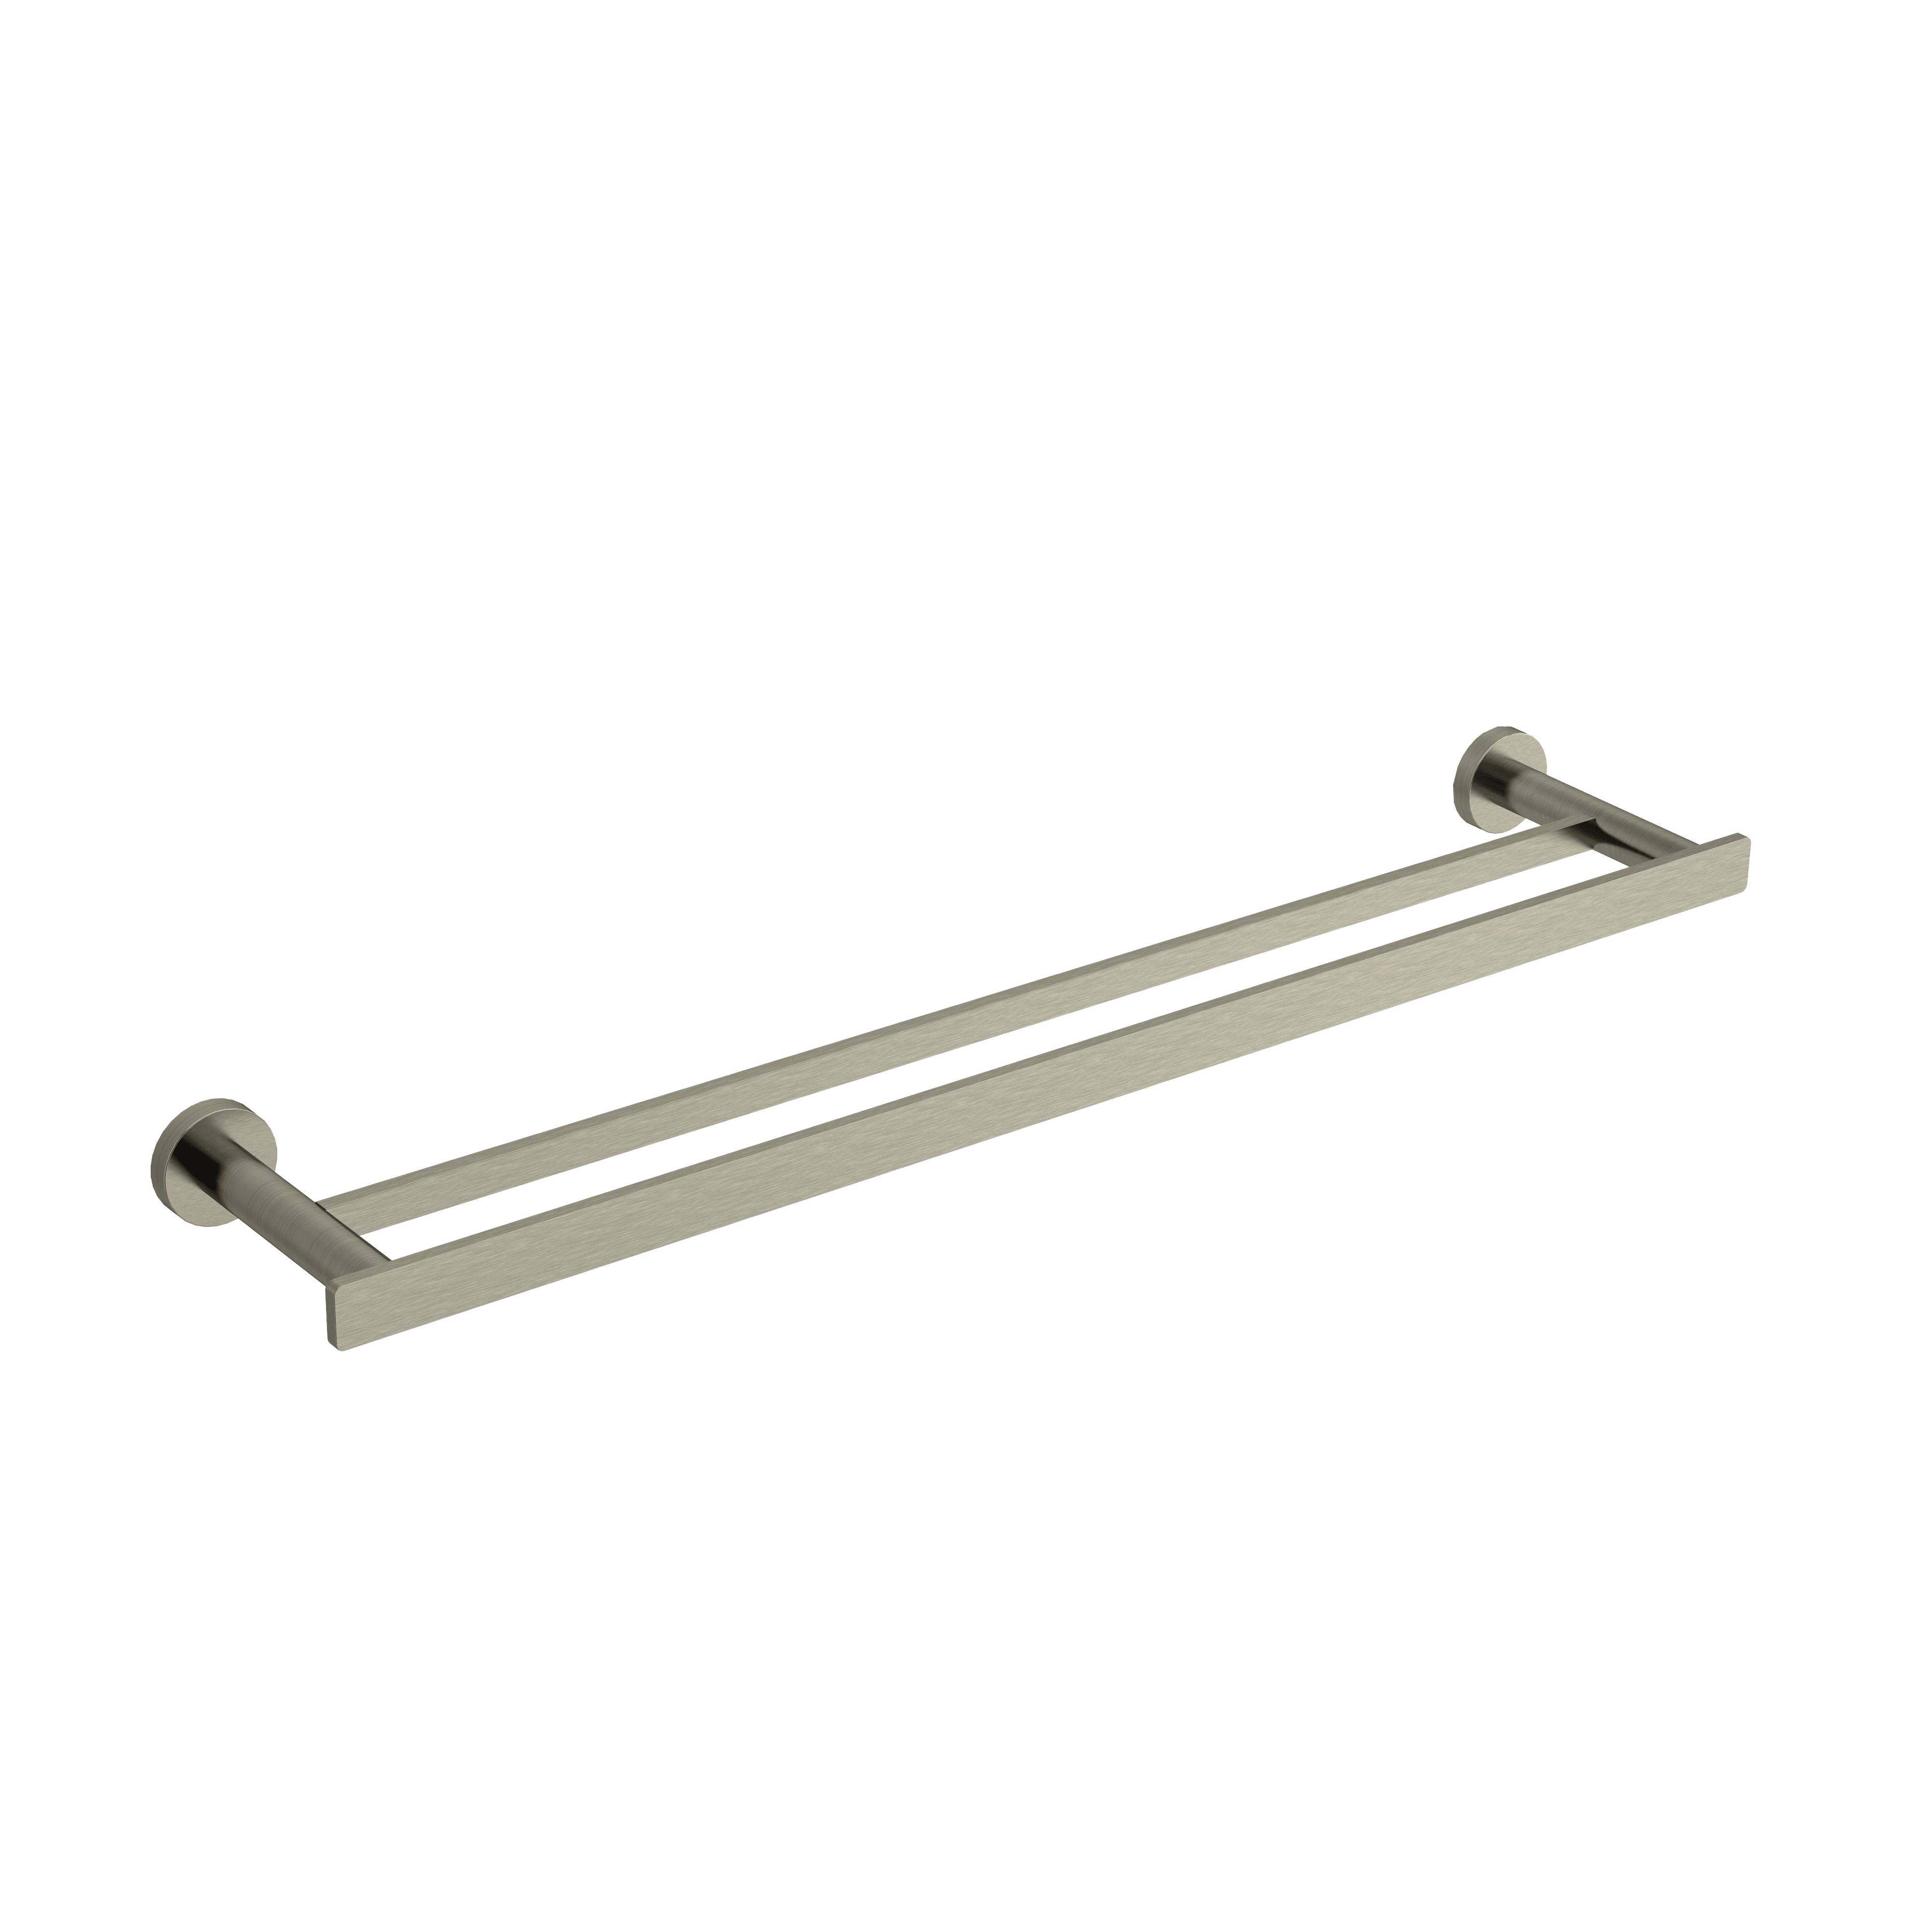 Riobel Paradox Double 24 Inch Towel Bar - Brushed Gold